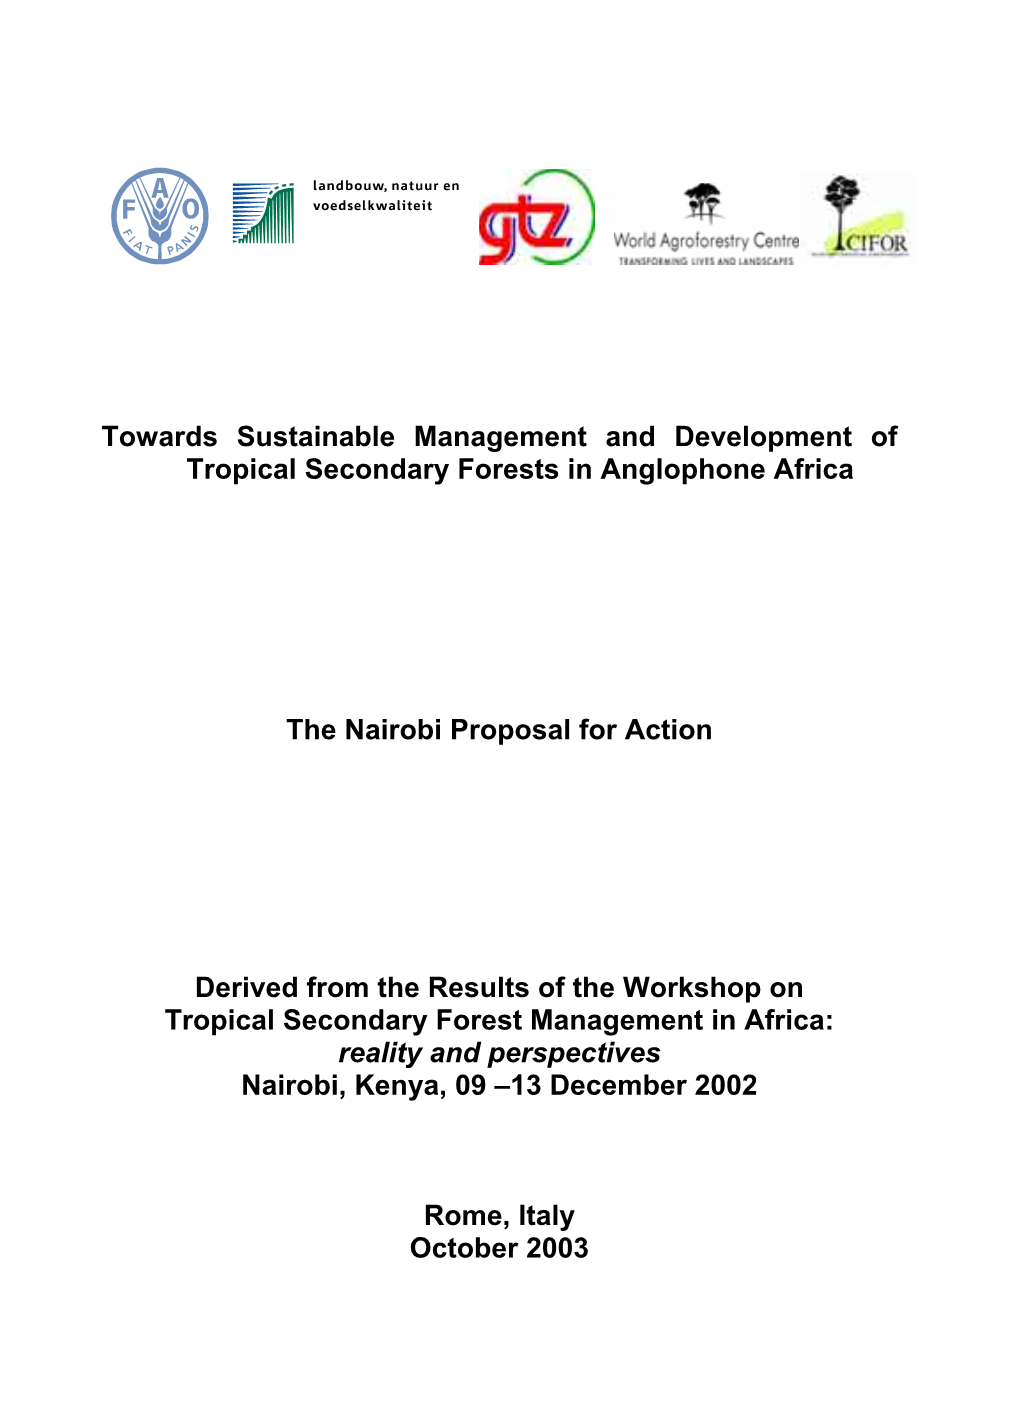 Towards Sustainable Management and Development of Tropical Secondary Forests in Anglophone Africa